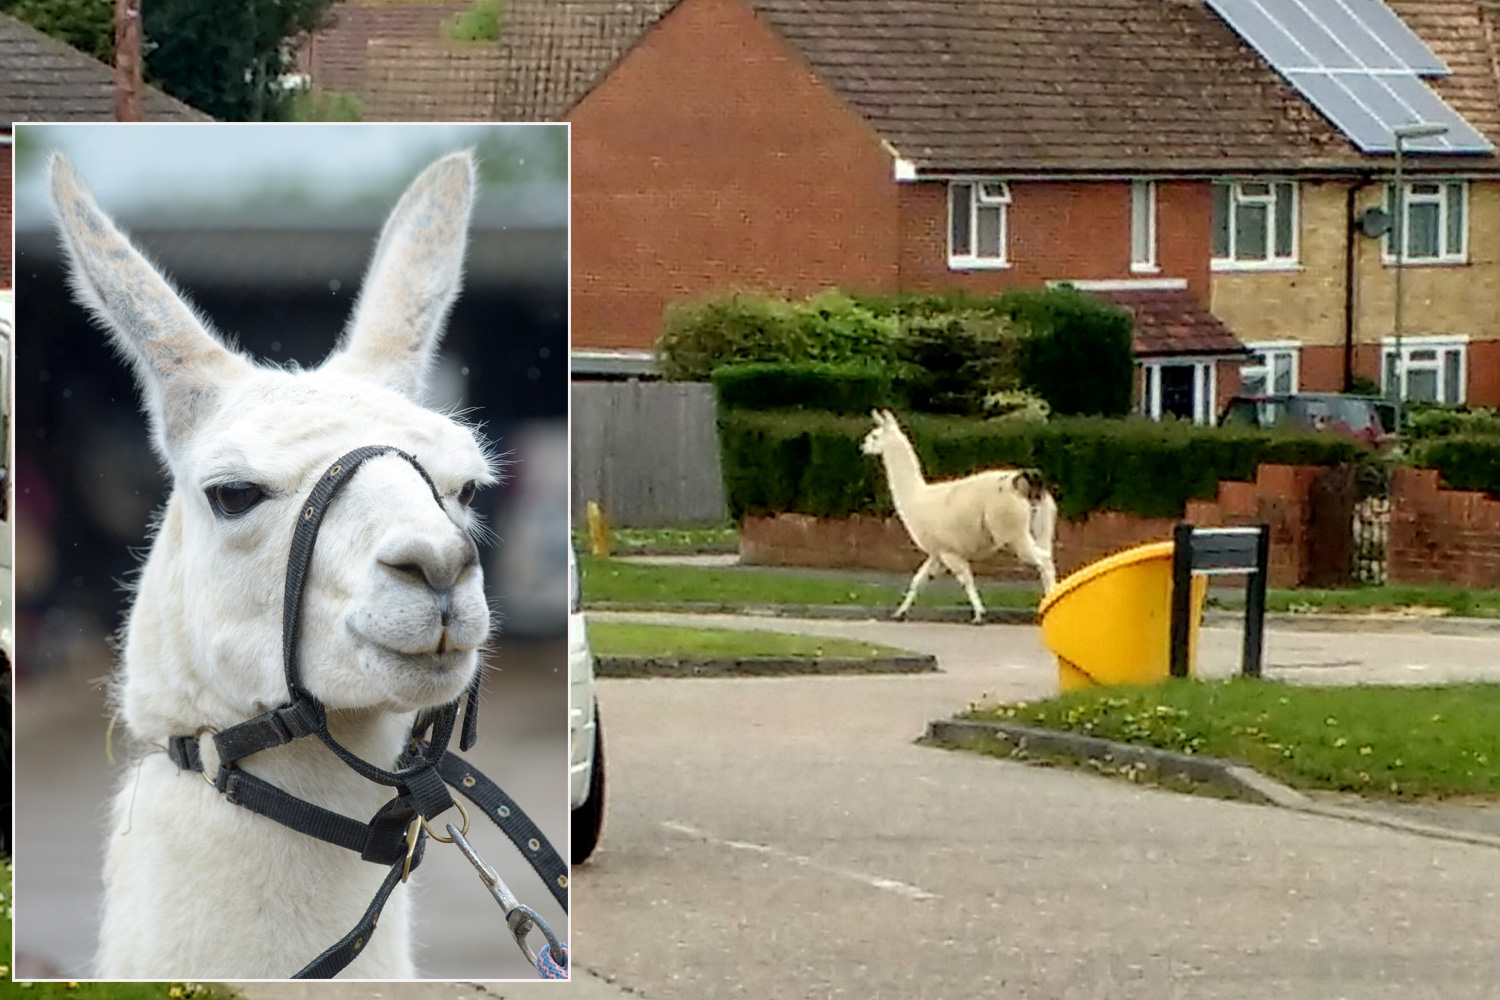 WOMAN RUGBY-TACKLED ESCAPED LLAMA CALLED BRAD PITT